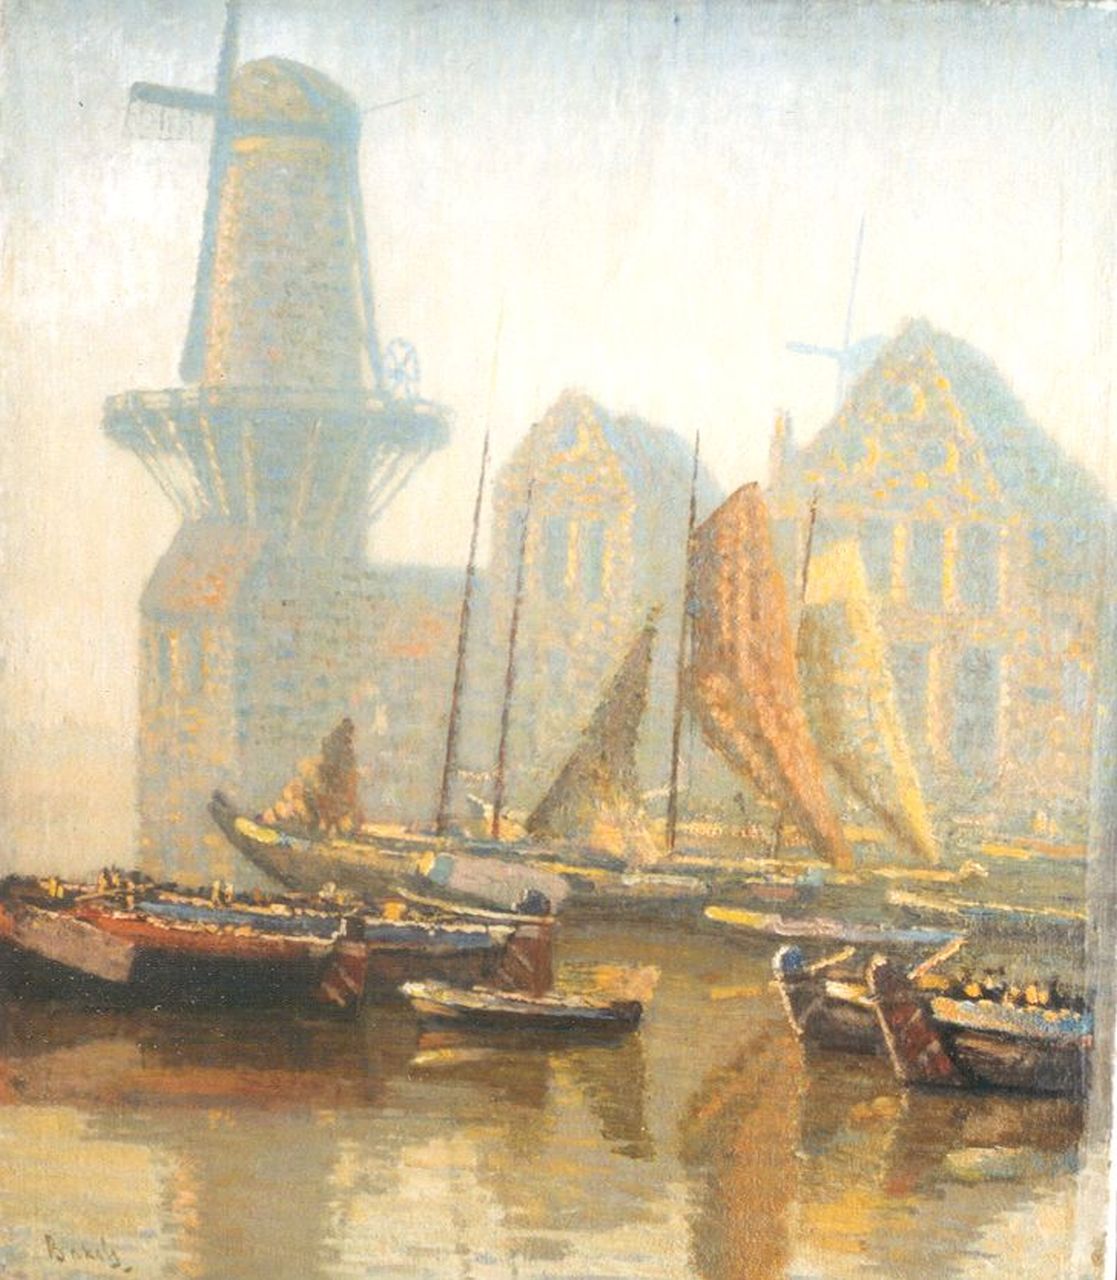 Bakels R.S.  | Reinier Sybrand Bakels, Fishing-boats by a windmill, Delfshaven, oil on canvas 64.0 x 55.1 cm, signed l.l.